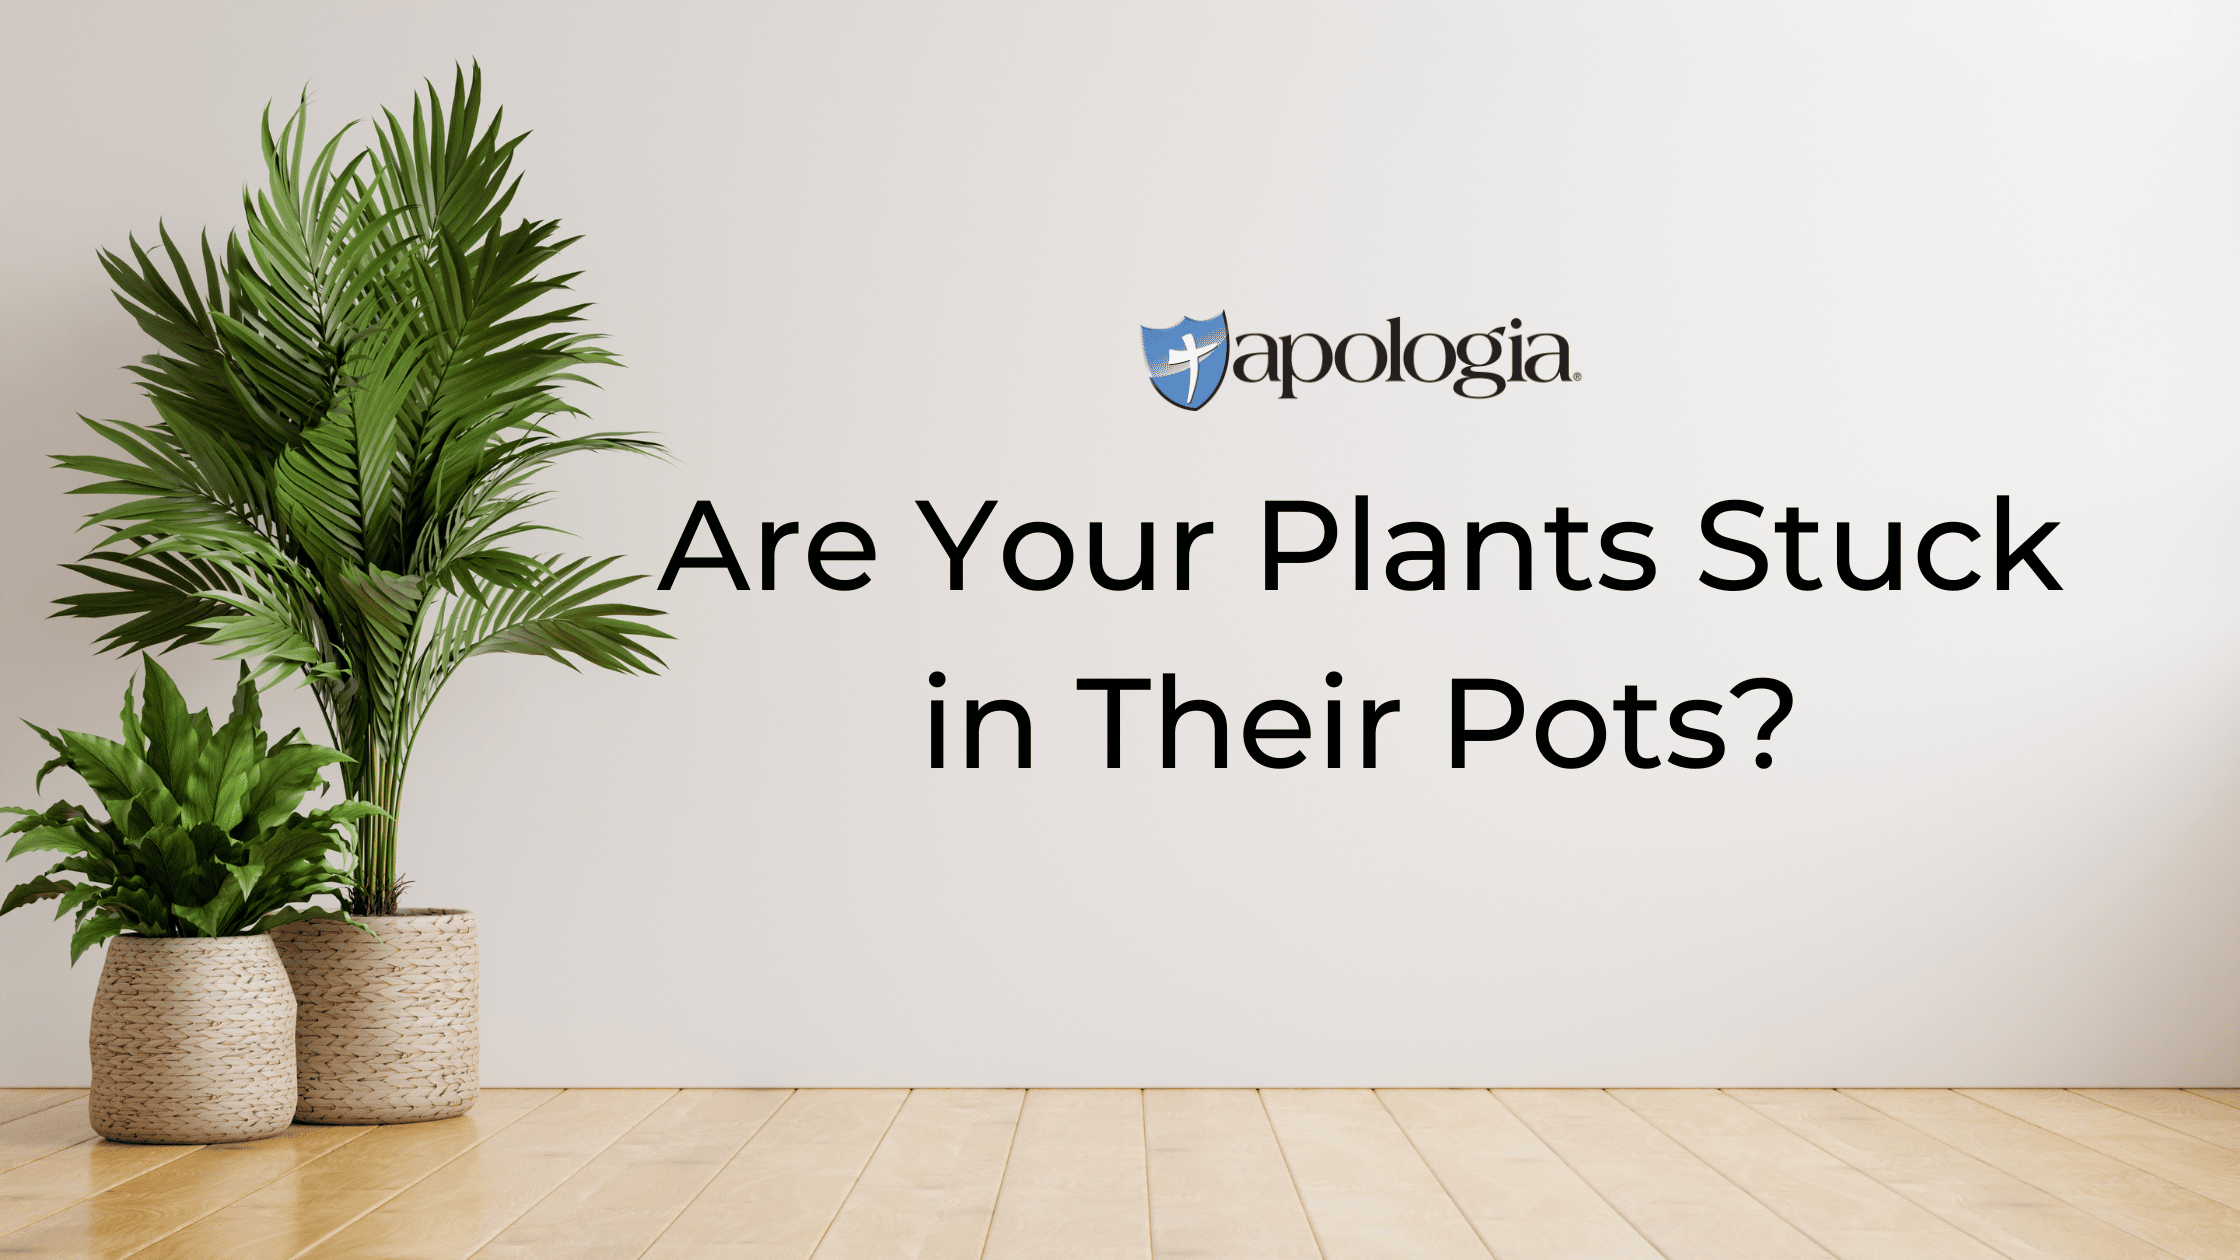 Are Your Plants Stuck in Their Pots?